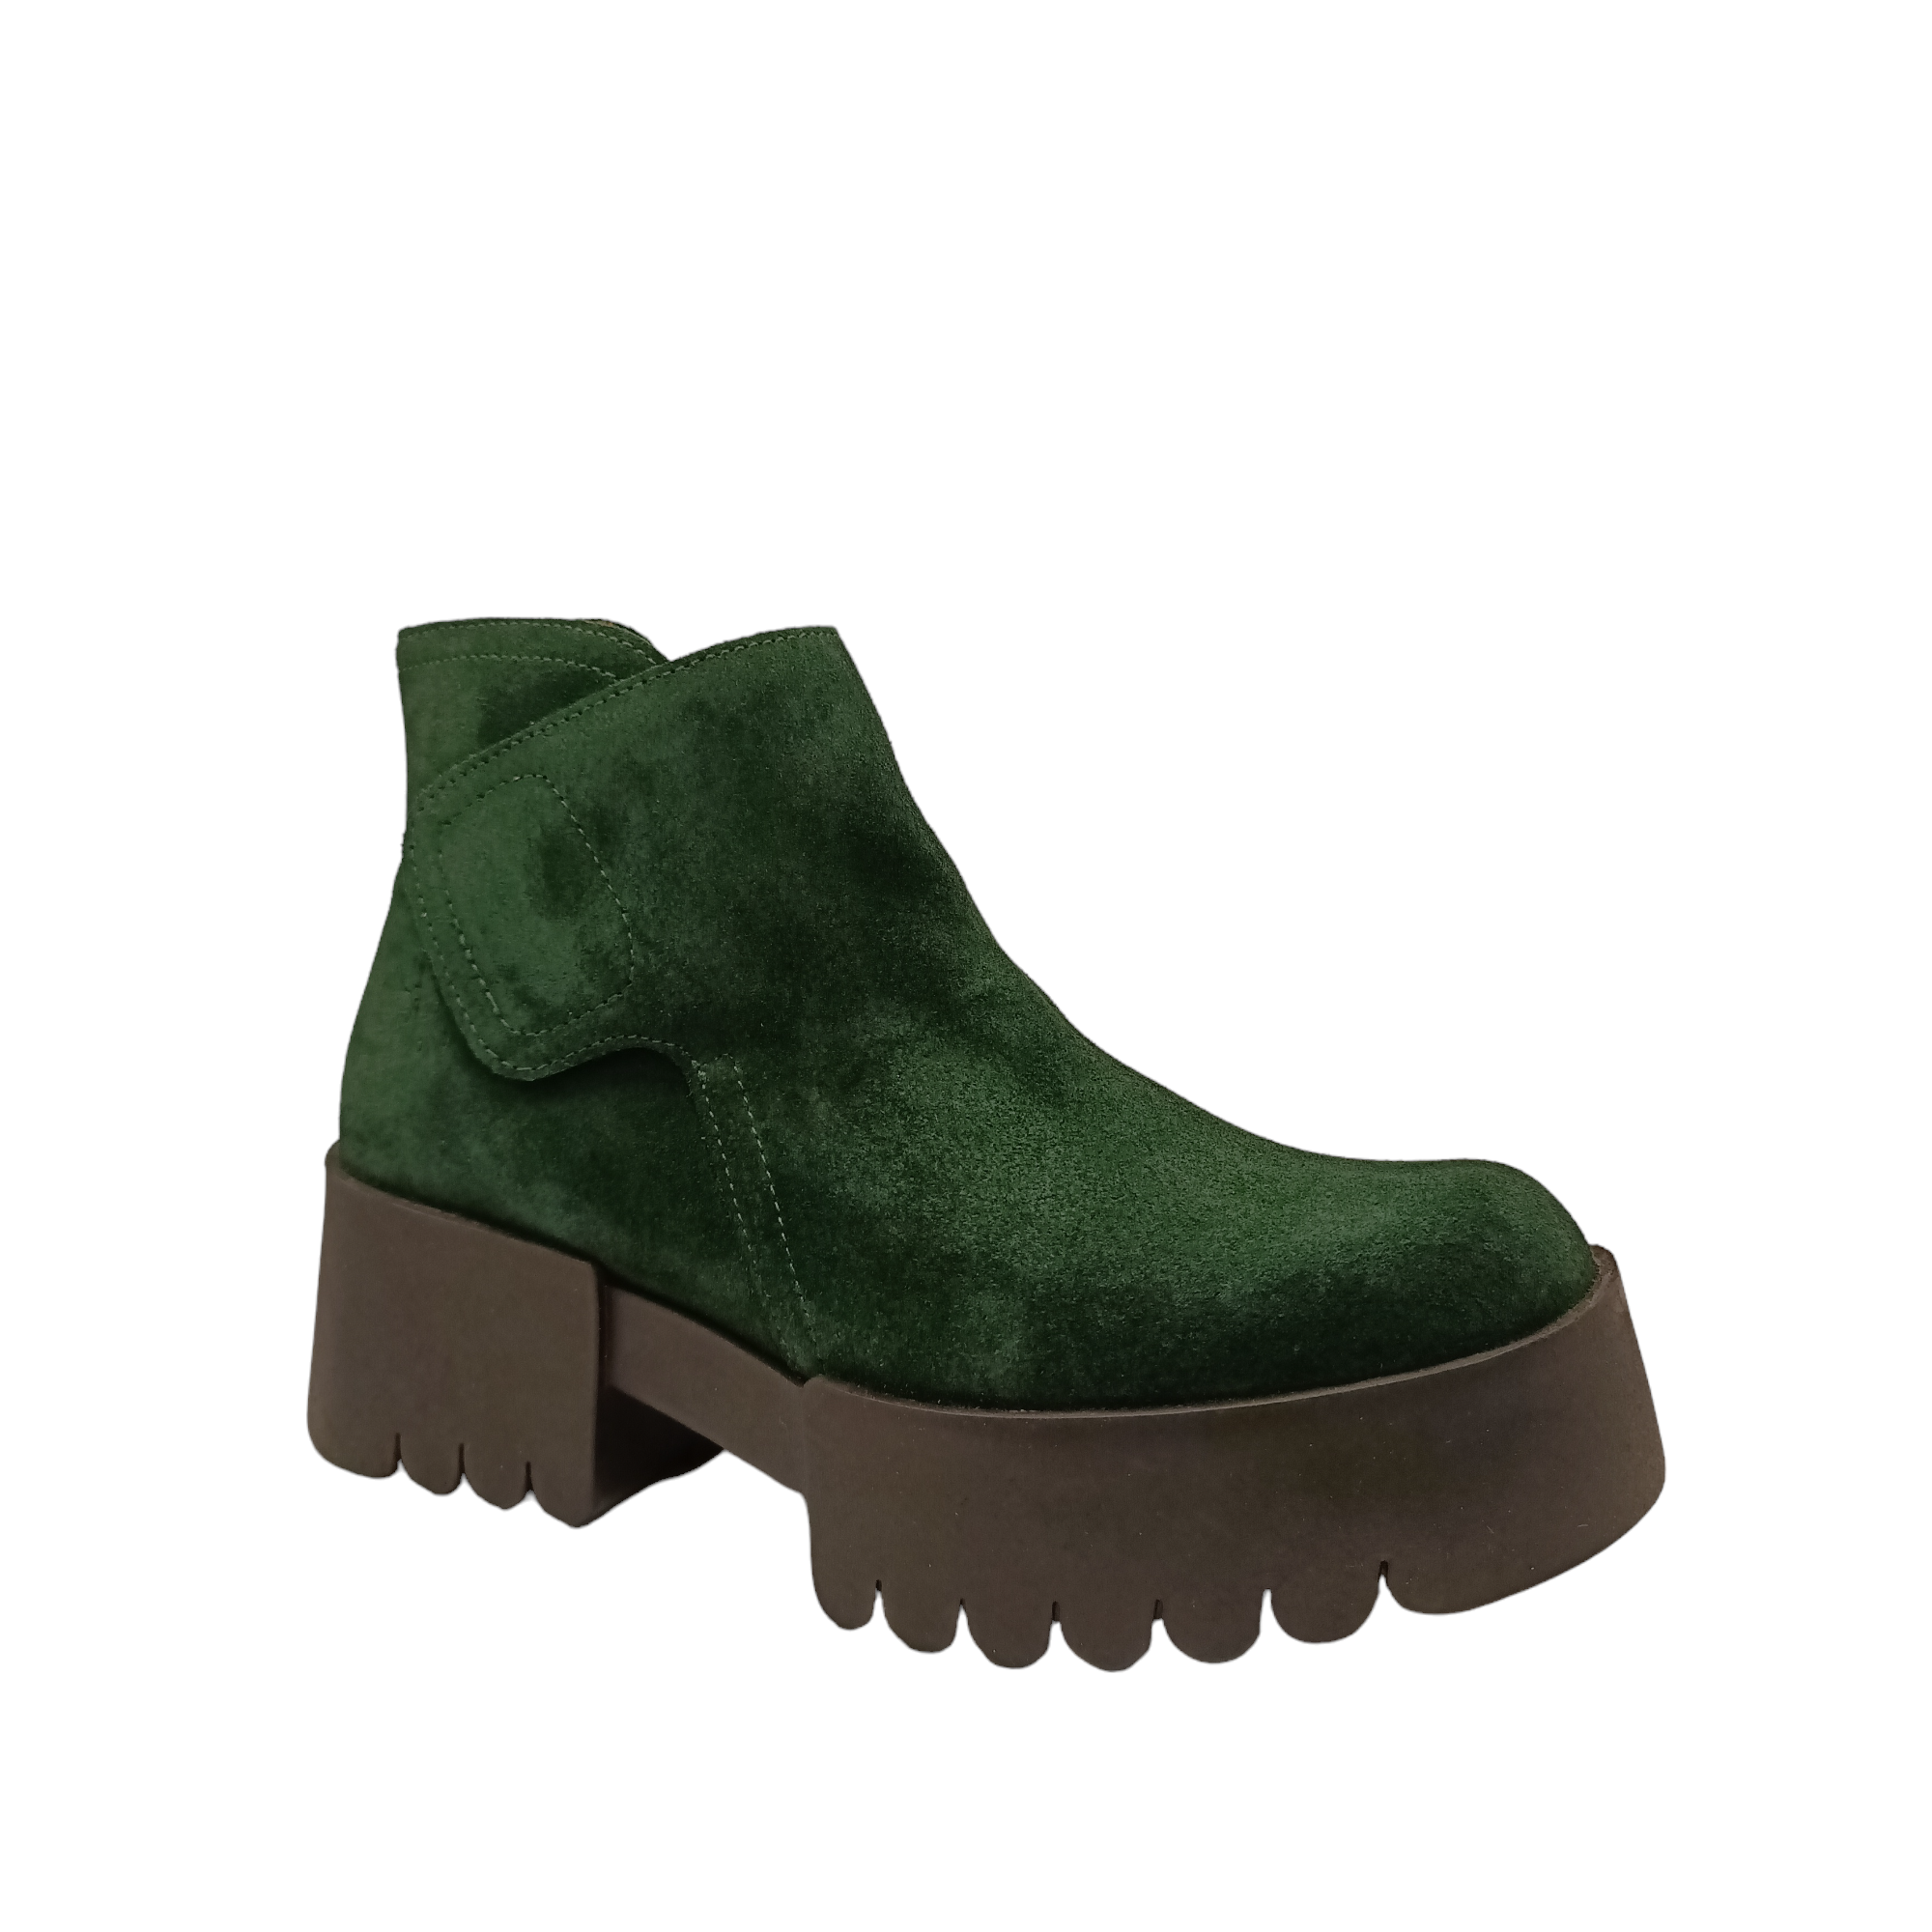 Shop Endo Fly London - with shoe&me - from Fly London - Boots - Boot, Winter, Womens - [collection]